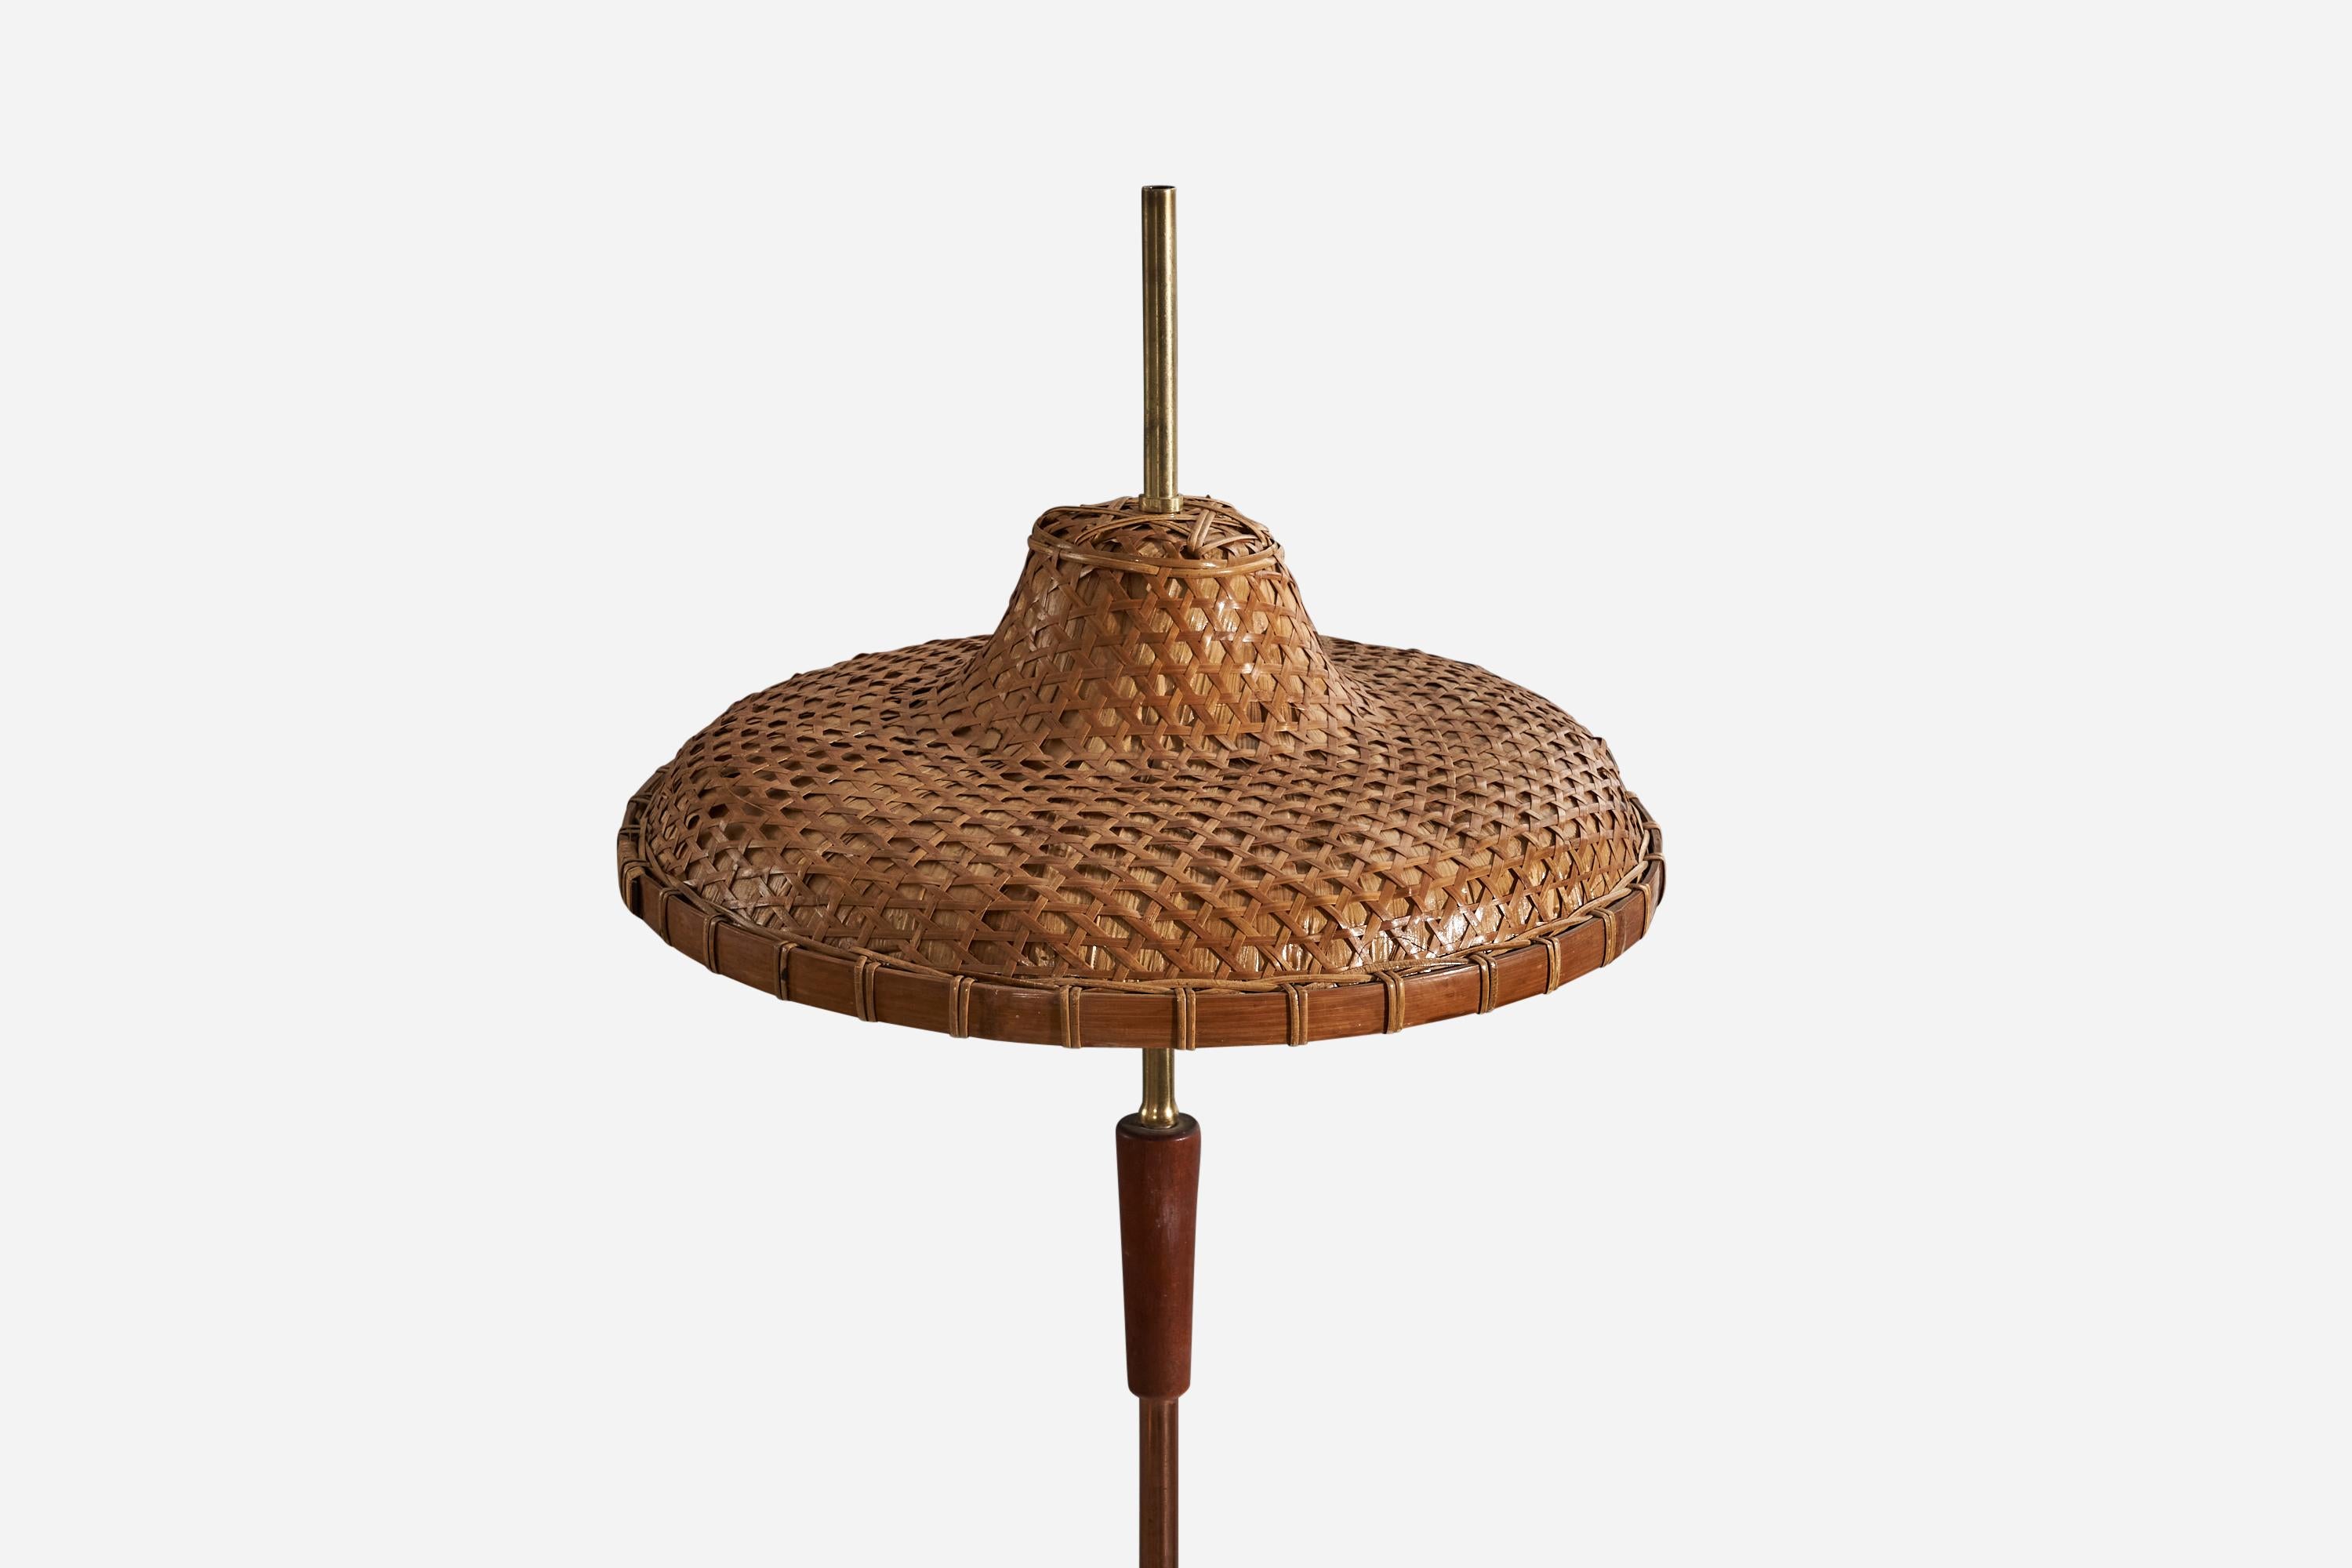 Italian Designer, Floor Lamp, Brass, Copper, Teak, Rattan, Italy, 1950s In Good Condition For Sale In High Point, NC